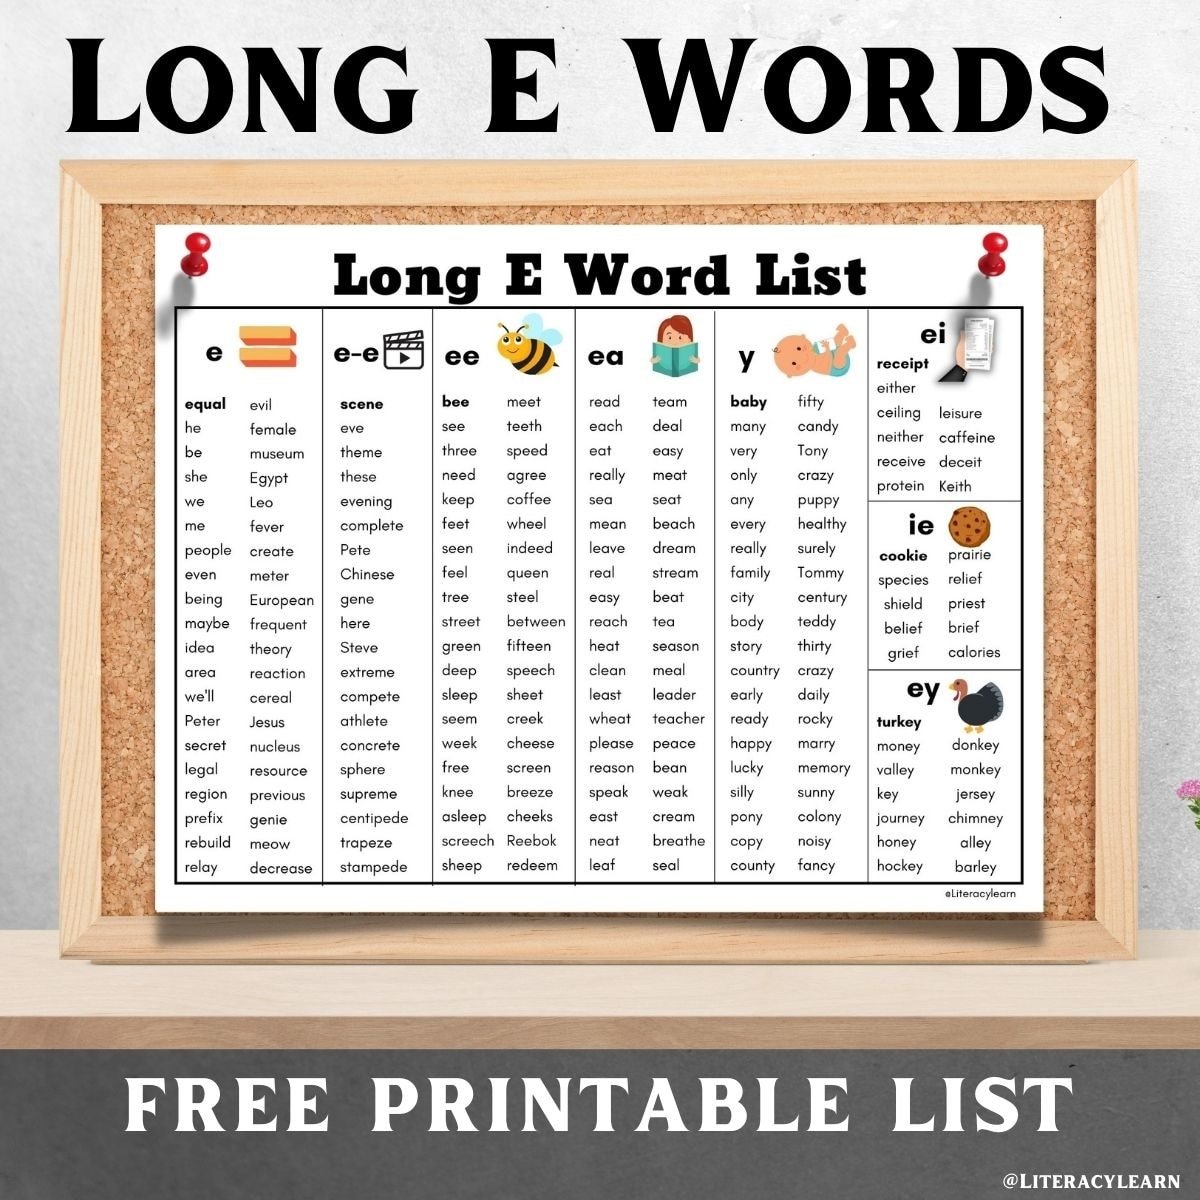 Corkboard graphic featuring Long E vowel sound words.